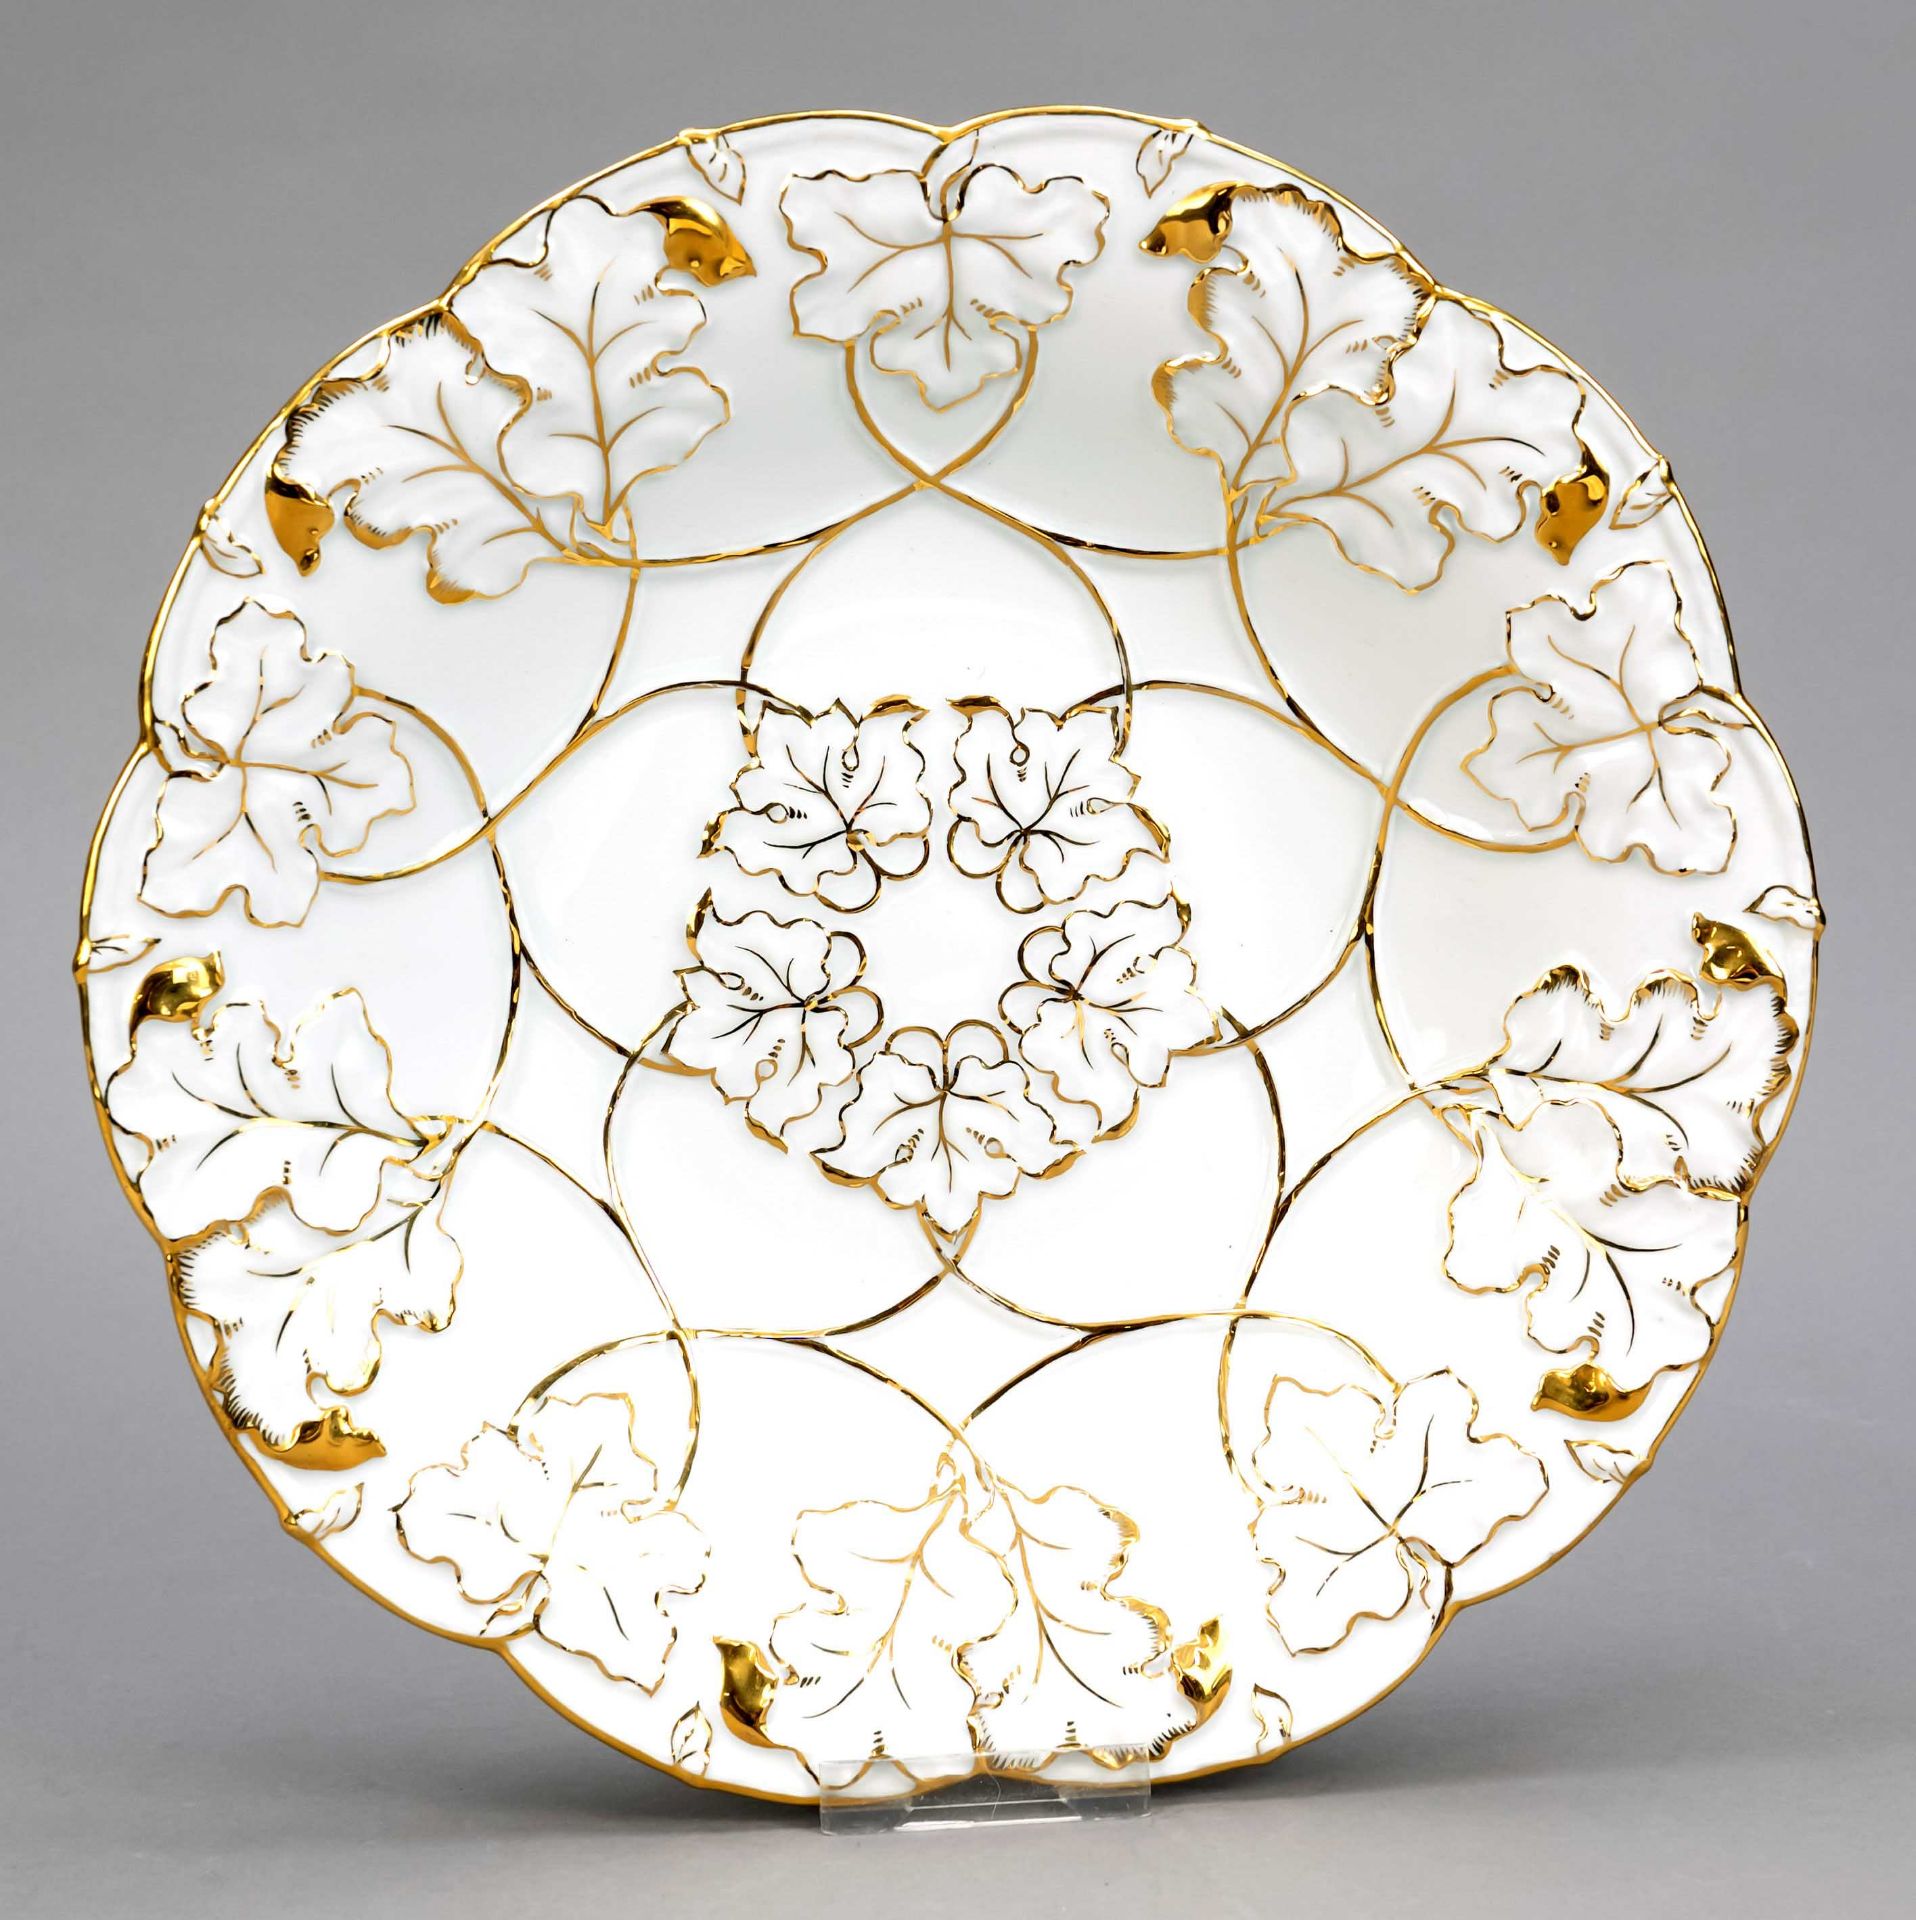 Showpiece bowl, Meissen, after 1950, 1st choice, model no. 138, relief surface with vine leaves